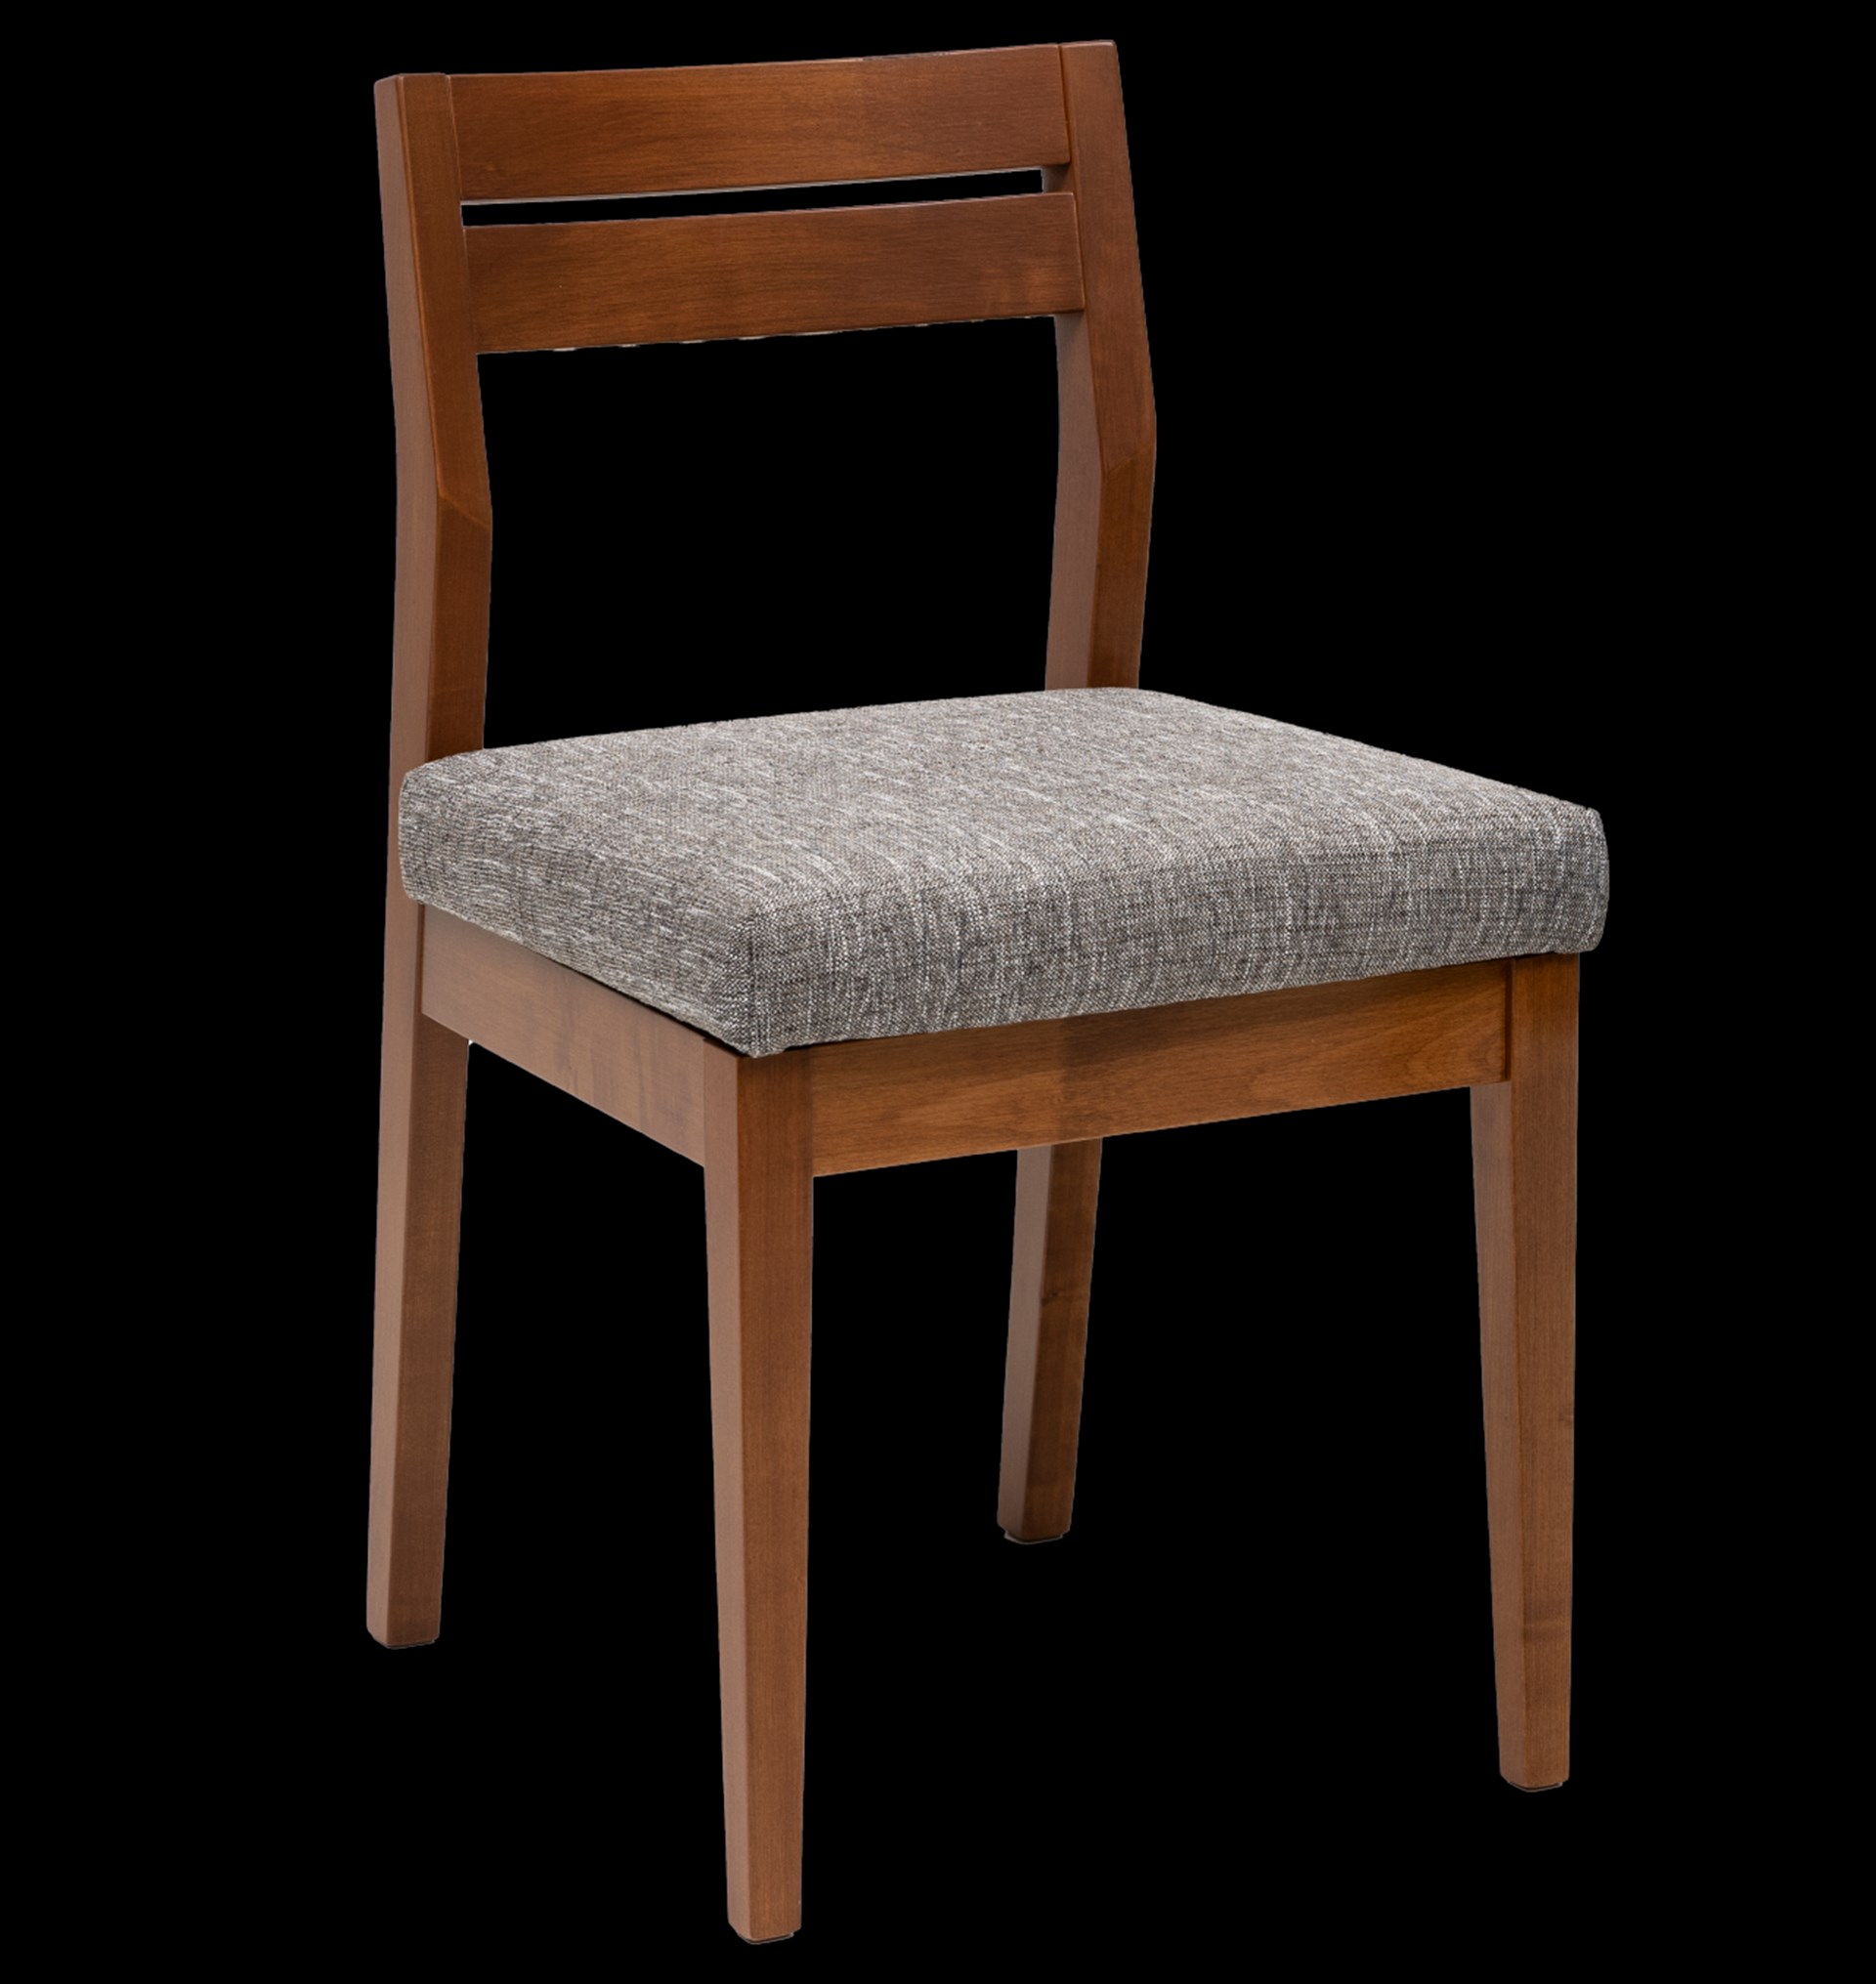 Cropped Hopscotch Rail Back Dining Chair